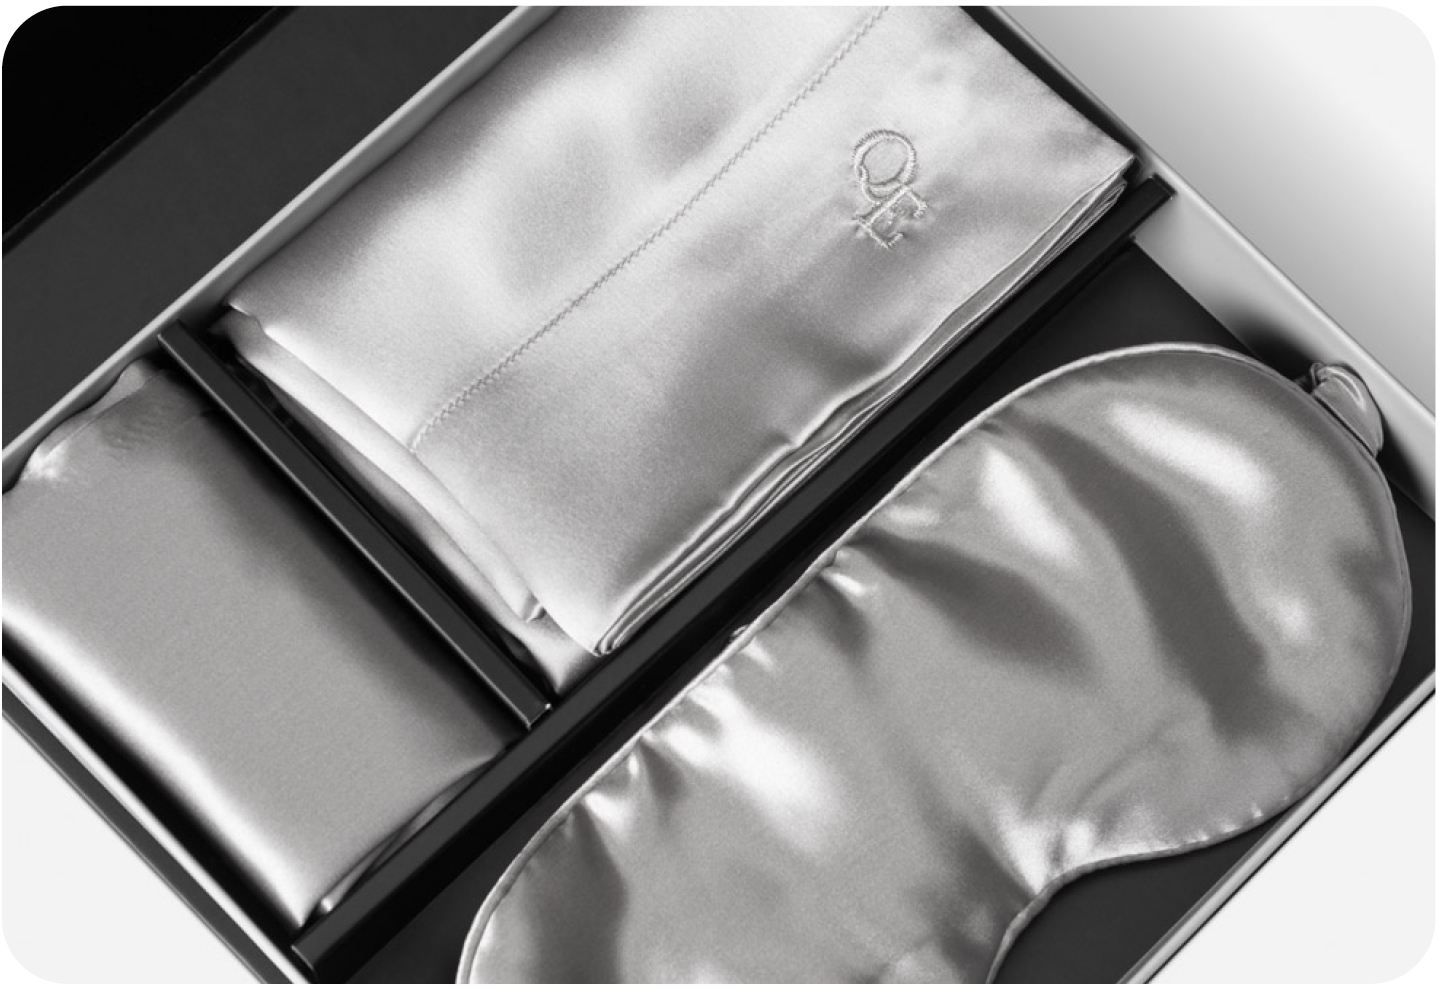 Our Mulberry Silk Gift Set In Silver with Eye Mask, Delicates Bag and Pillow Case displayed in its packaging